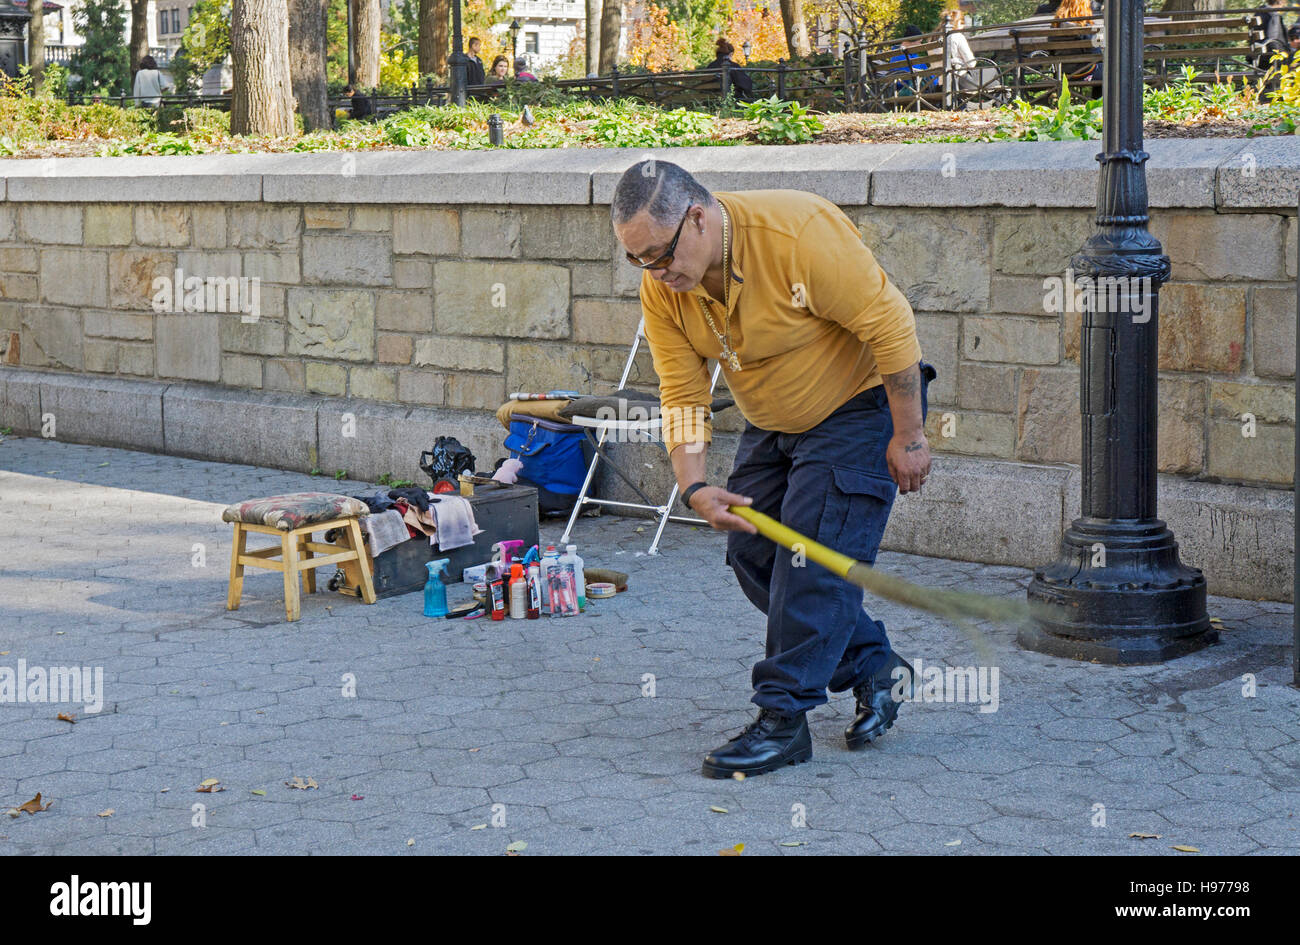 A shoeshine man cleans the area around his stand with an old fashioned straw broom. In Union Square Park in New York City. Stock Photo